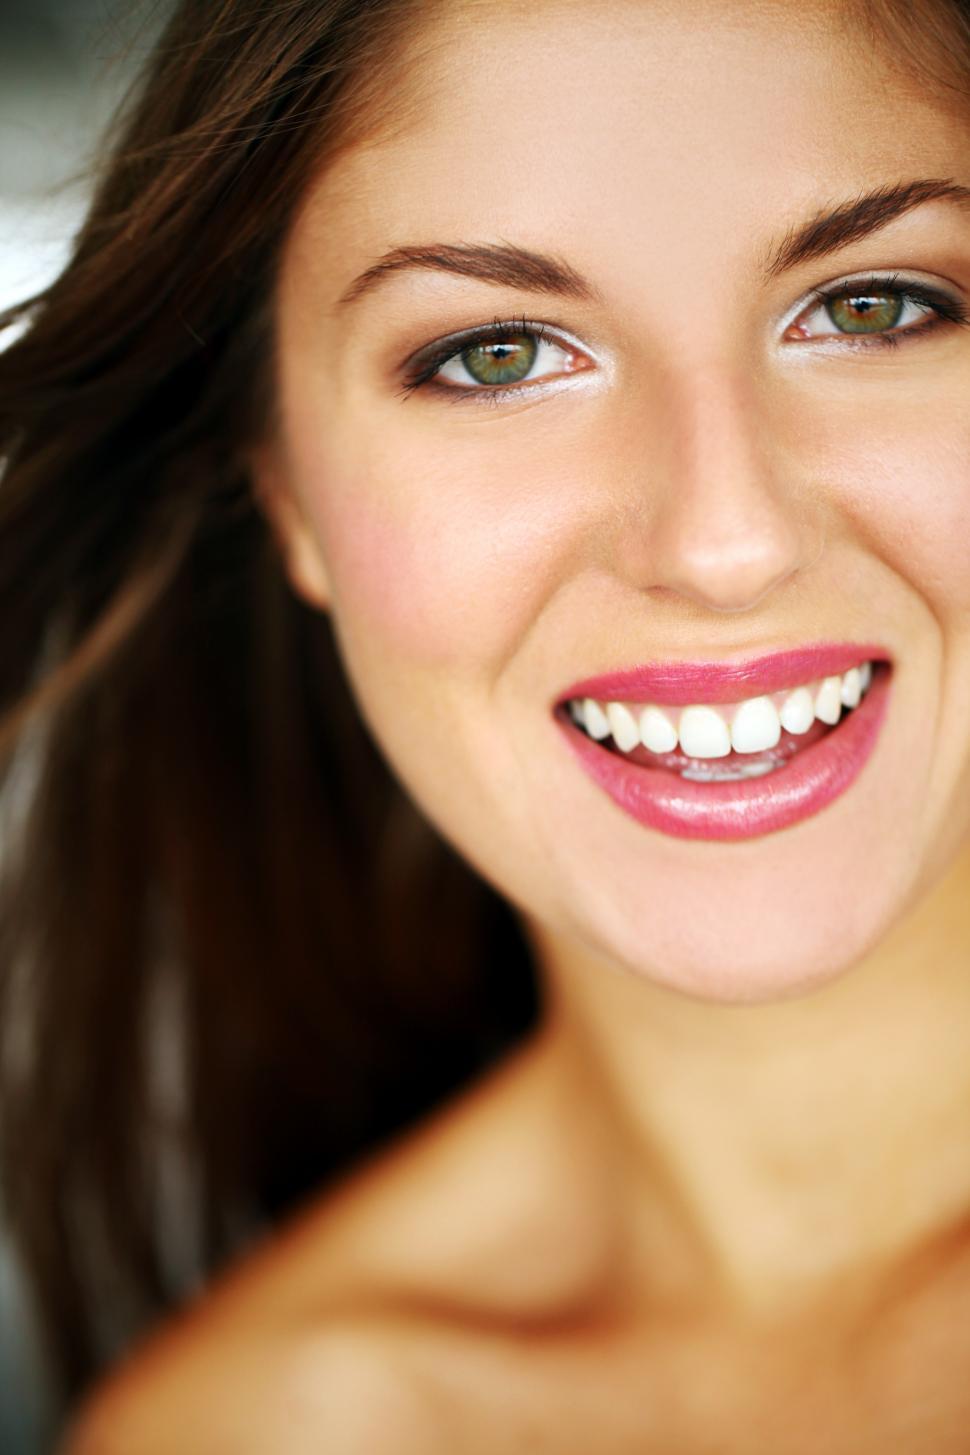 Download Free Stock Photo of Portrait of young smiling woman 